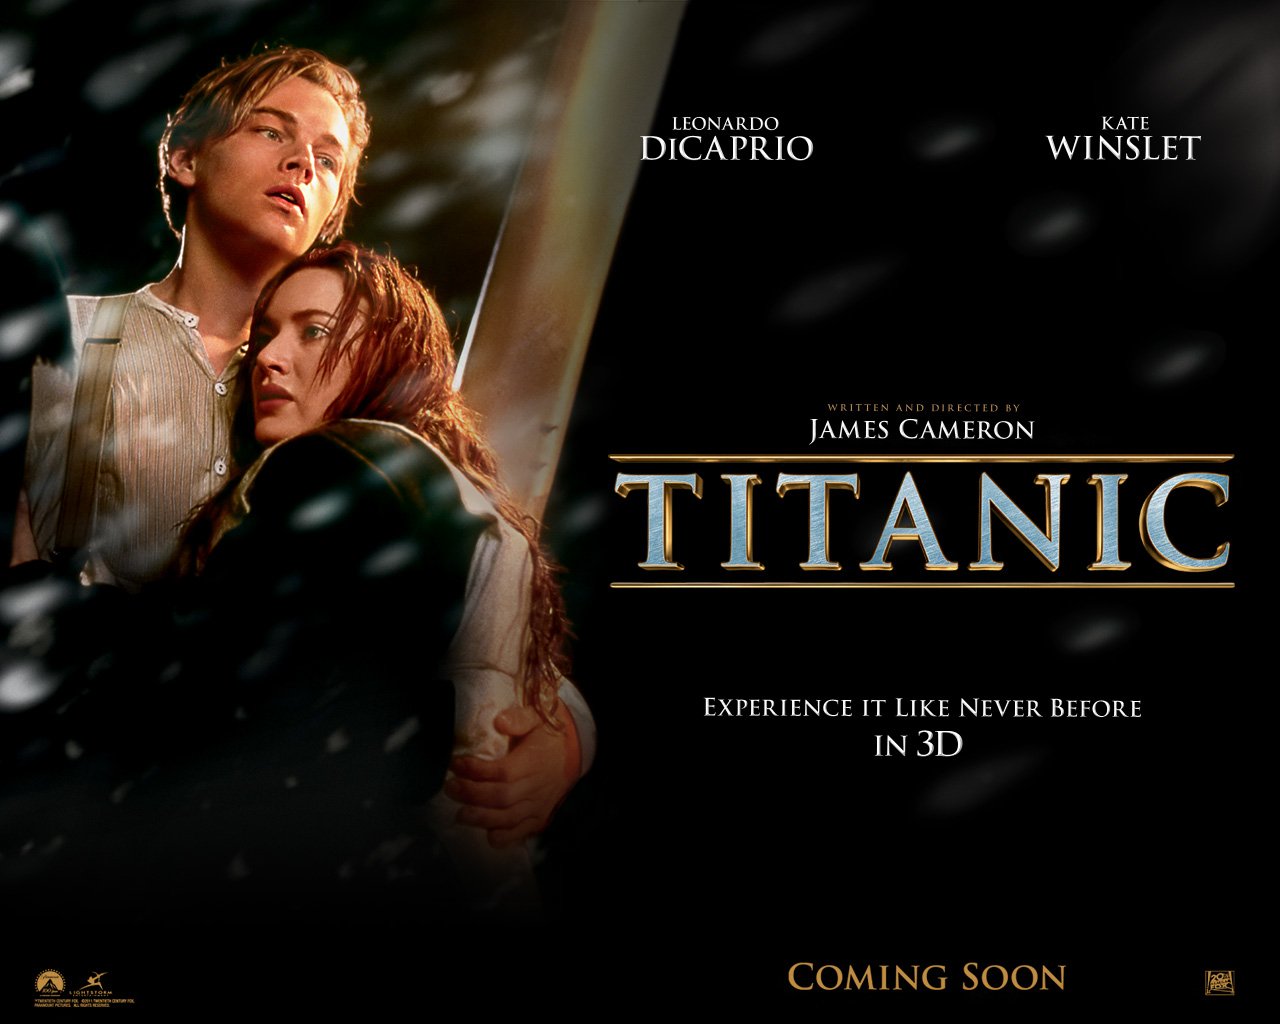 19 Titanic HD Wallpapers | Backgrounds - Wallpaper Abyss